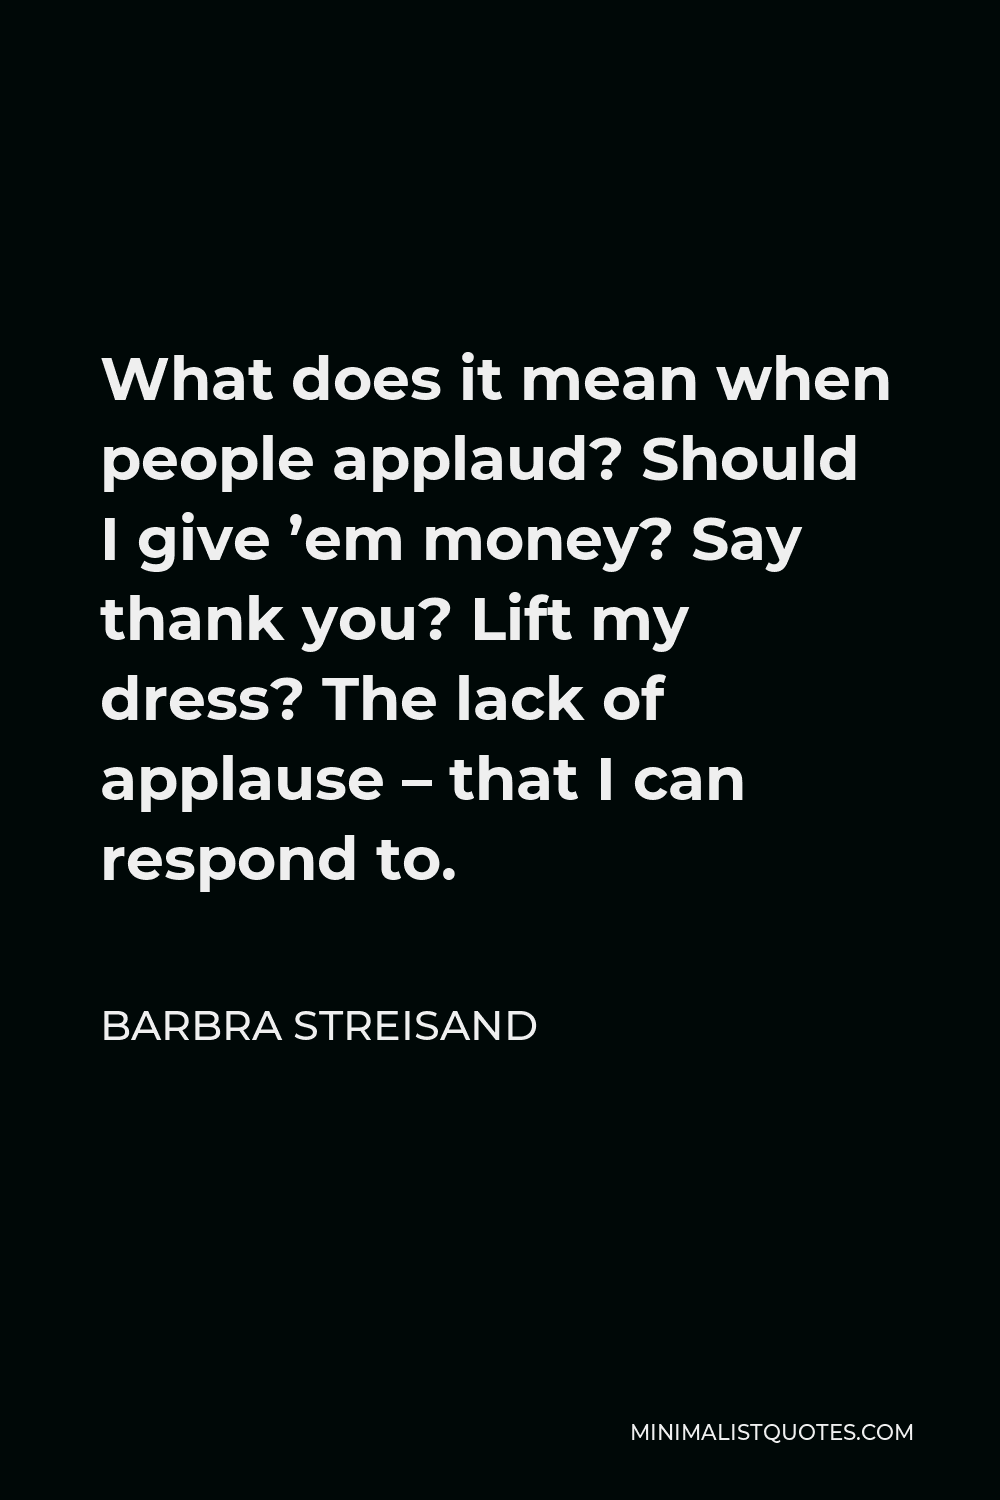 Barbra Streisand Quote - What does it mean when people applaud? Should I give ’em money? Say thank you? Lift my dress? The lack of applause – that I can respond to.